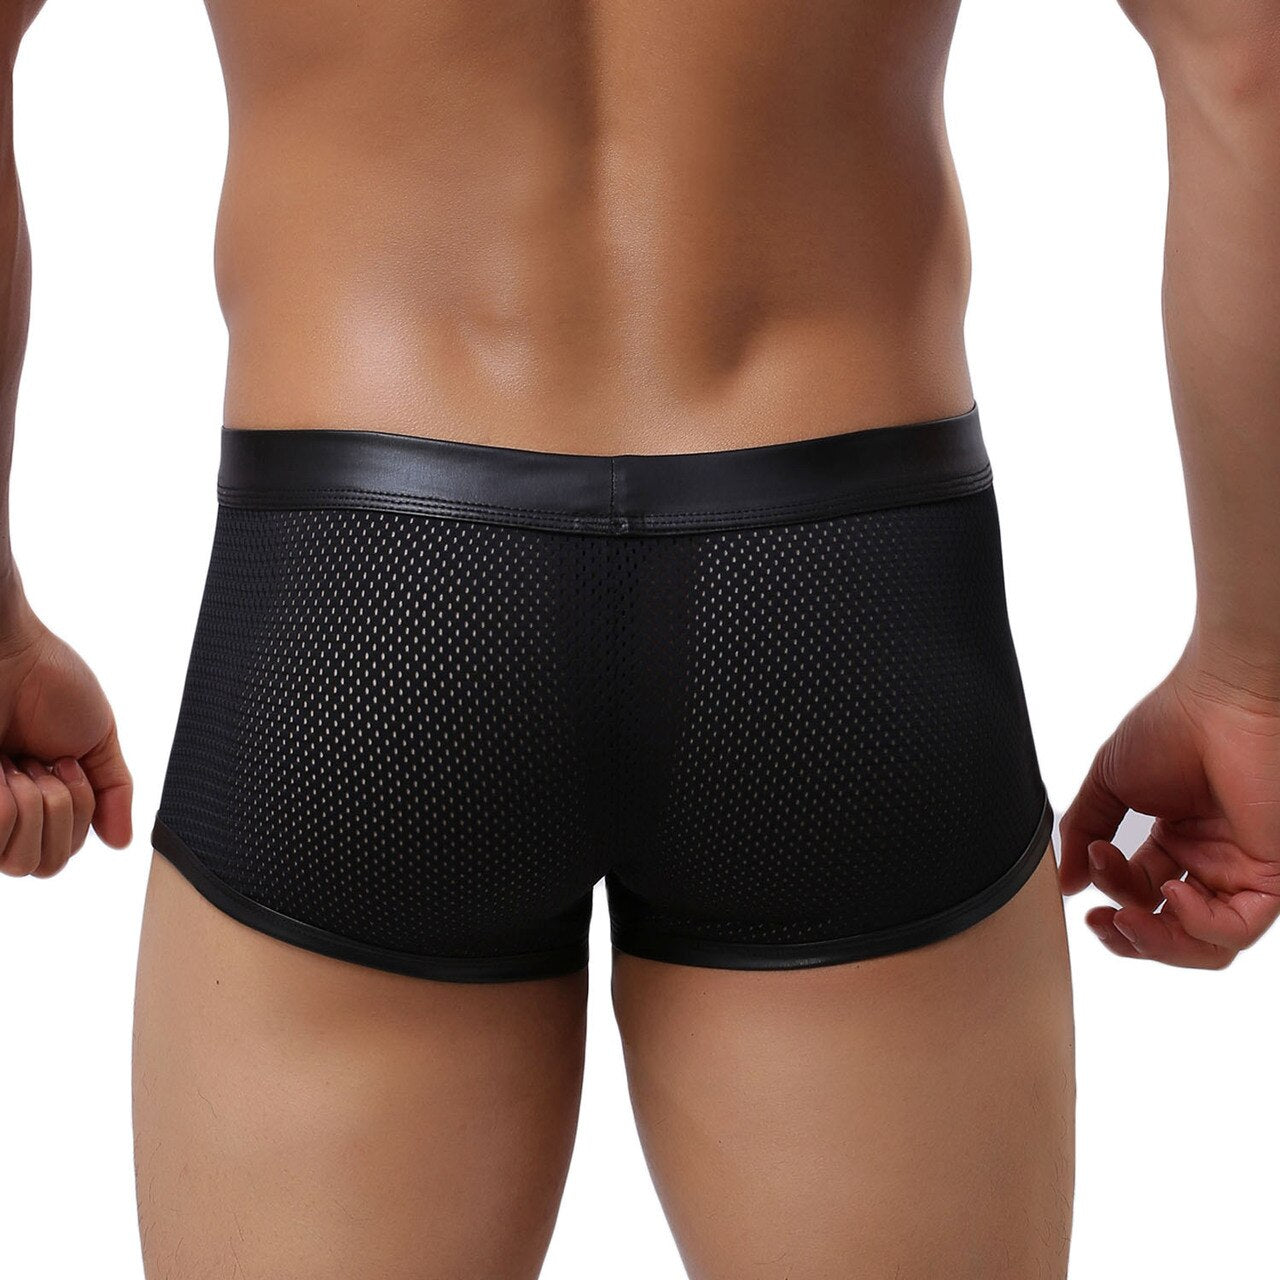 Mens Wetlook and Stretch Net Boxer Shorts